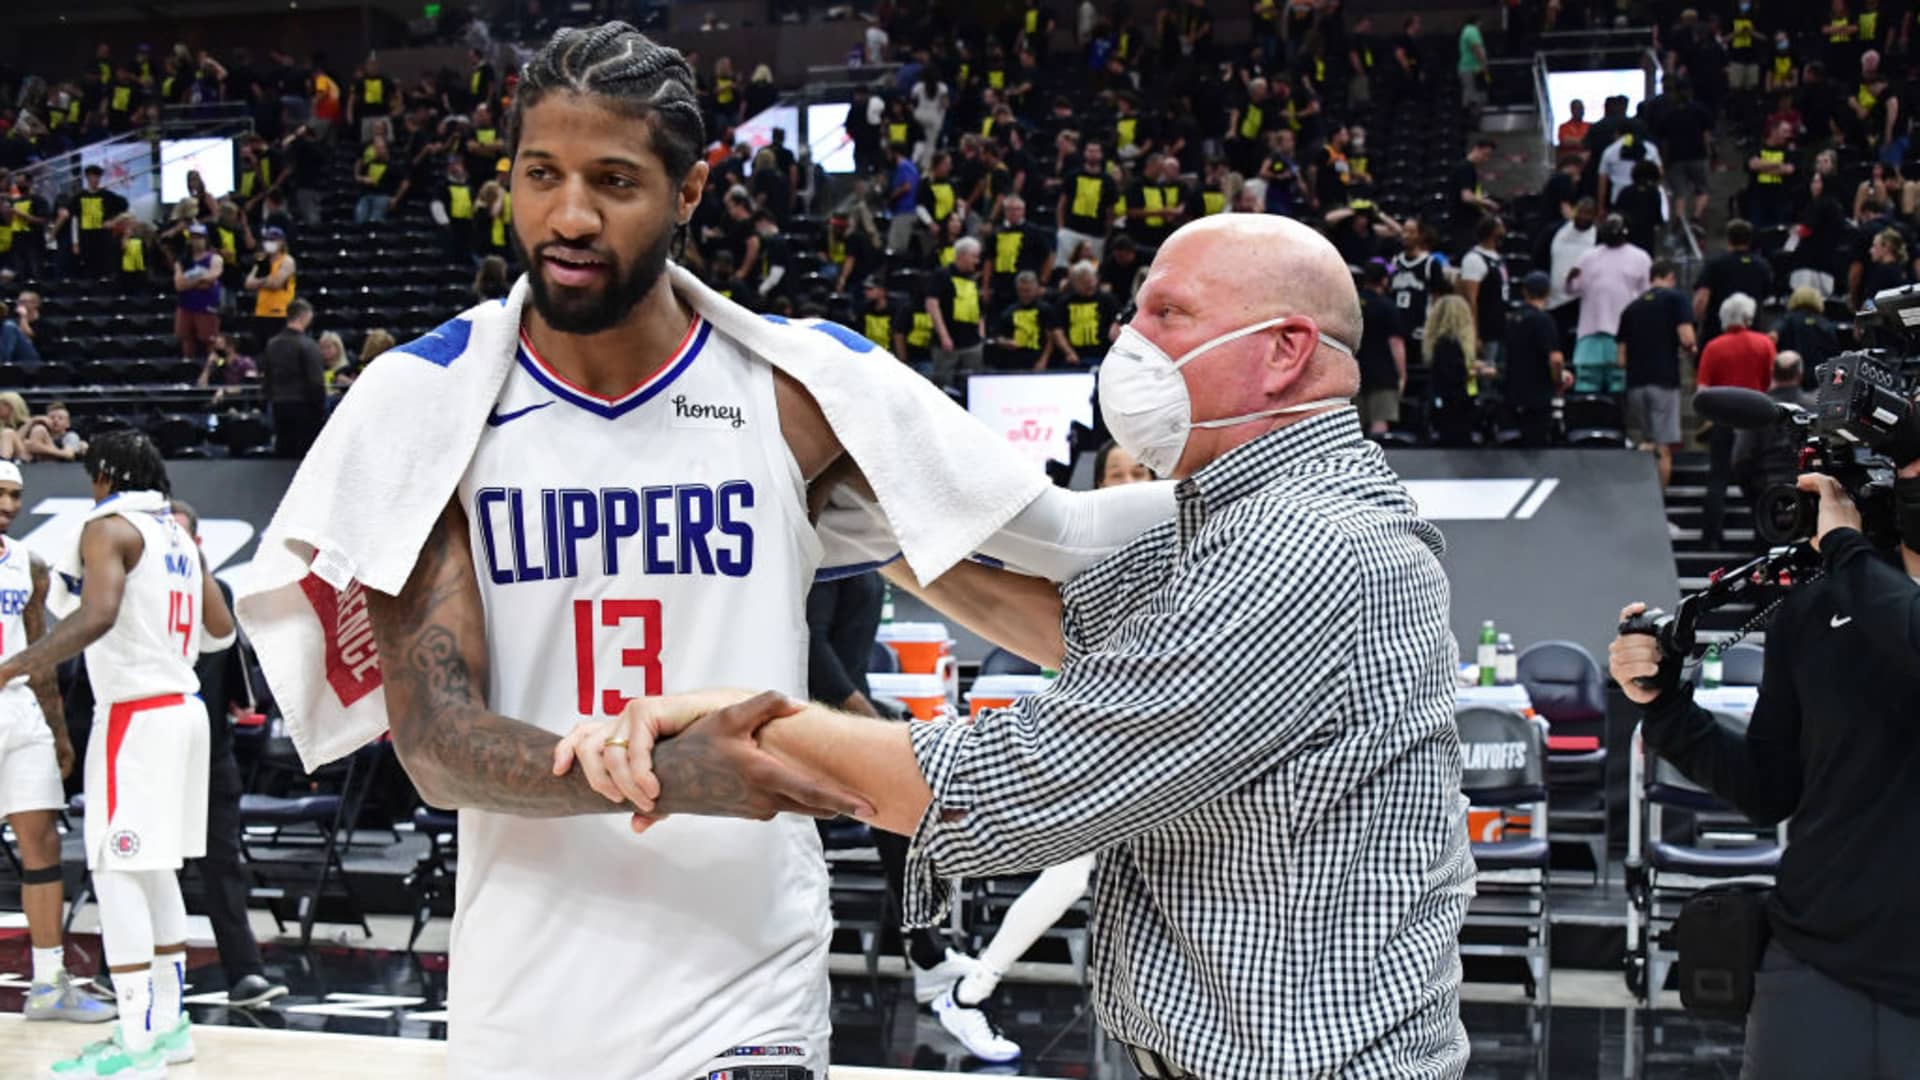 Paul George #13 of the LA Clippers talks to Owner, Steve Ballmer of the LA Clippers after the game against the Utah Jazz during Round 2, Game 5 of the 2021 NBA Playoffs on June 16, 2021 at vivint.SmartHome Arena in Salt Lake City, Utah.